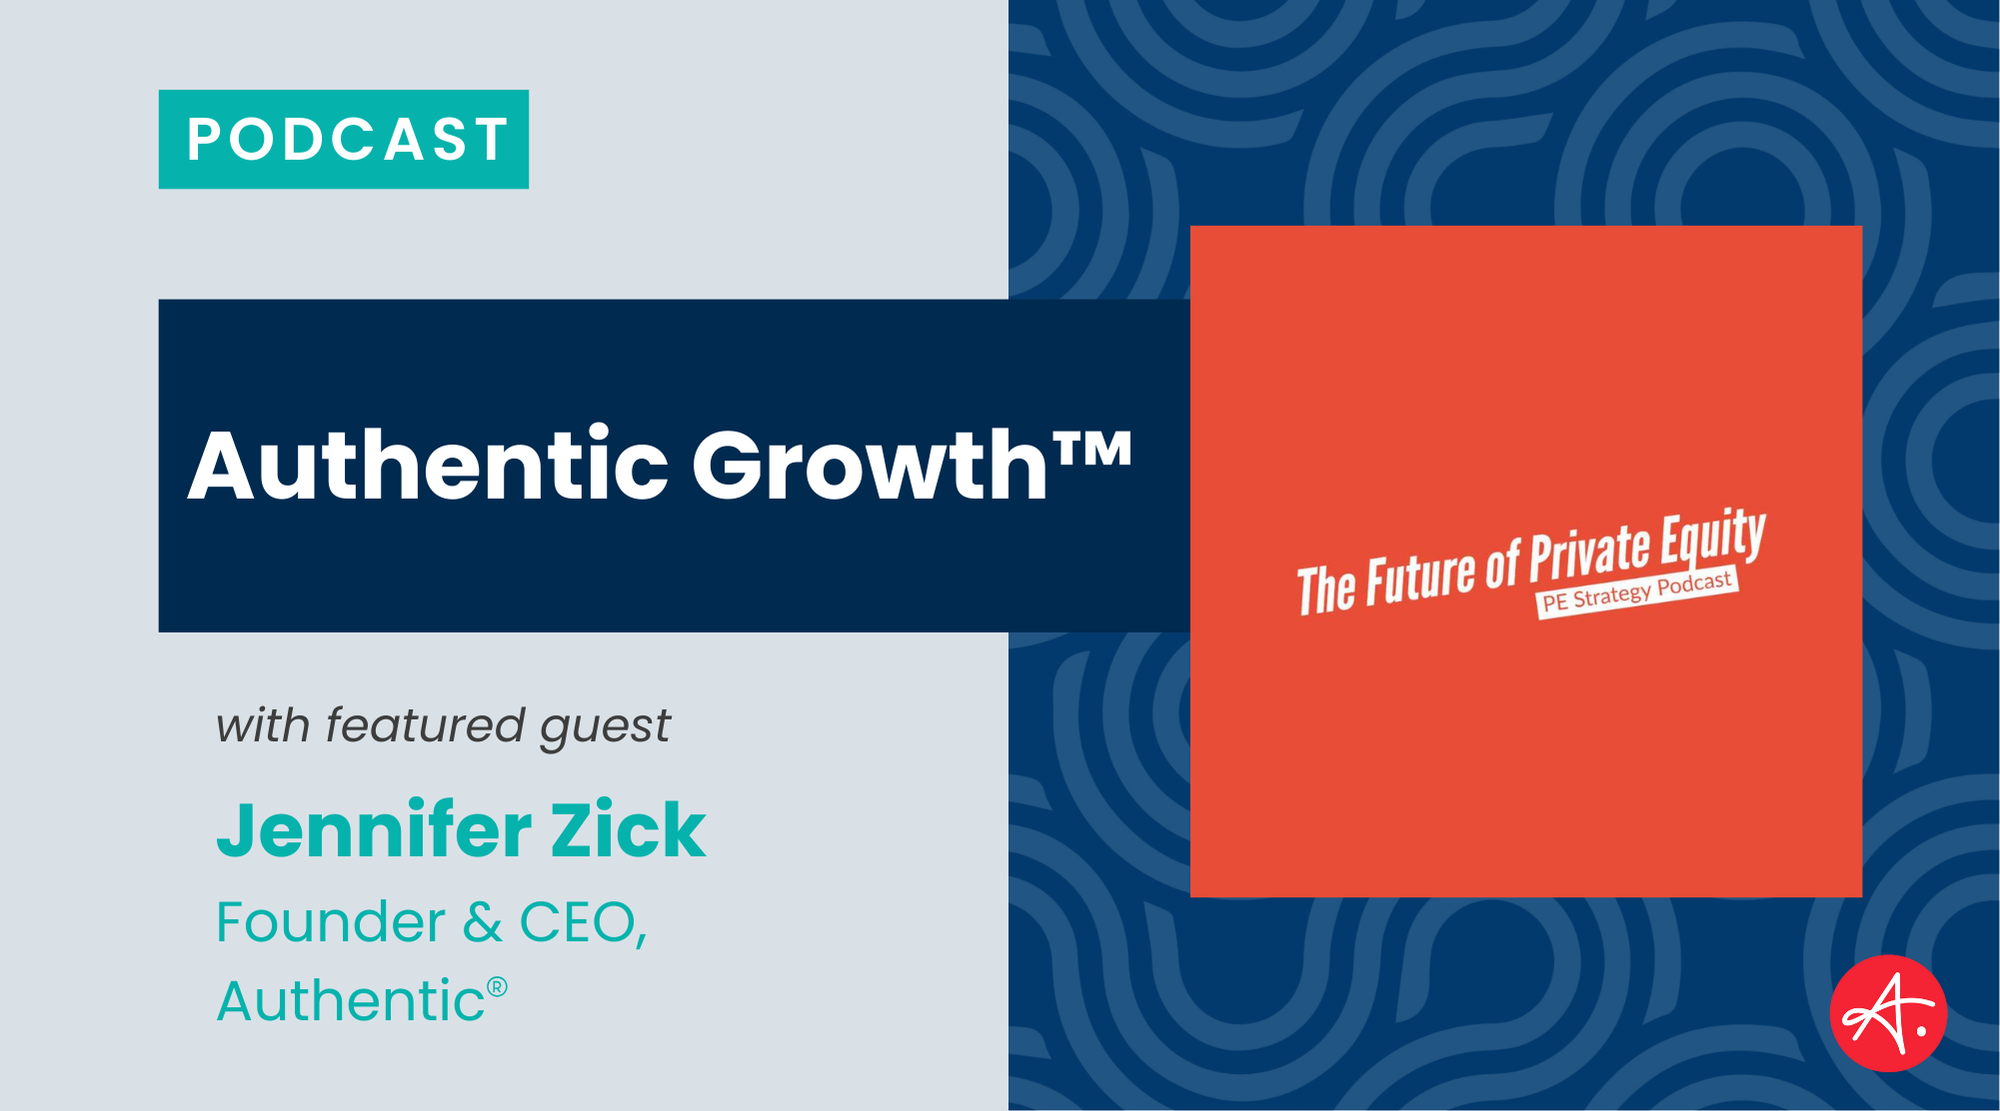 The Future of Private Equity Podcast featuring Jennifer Zick